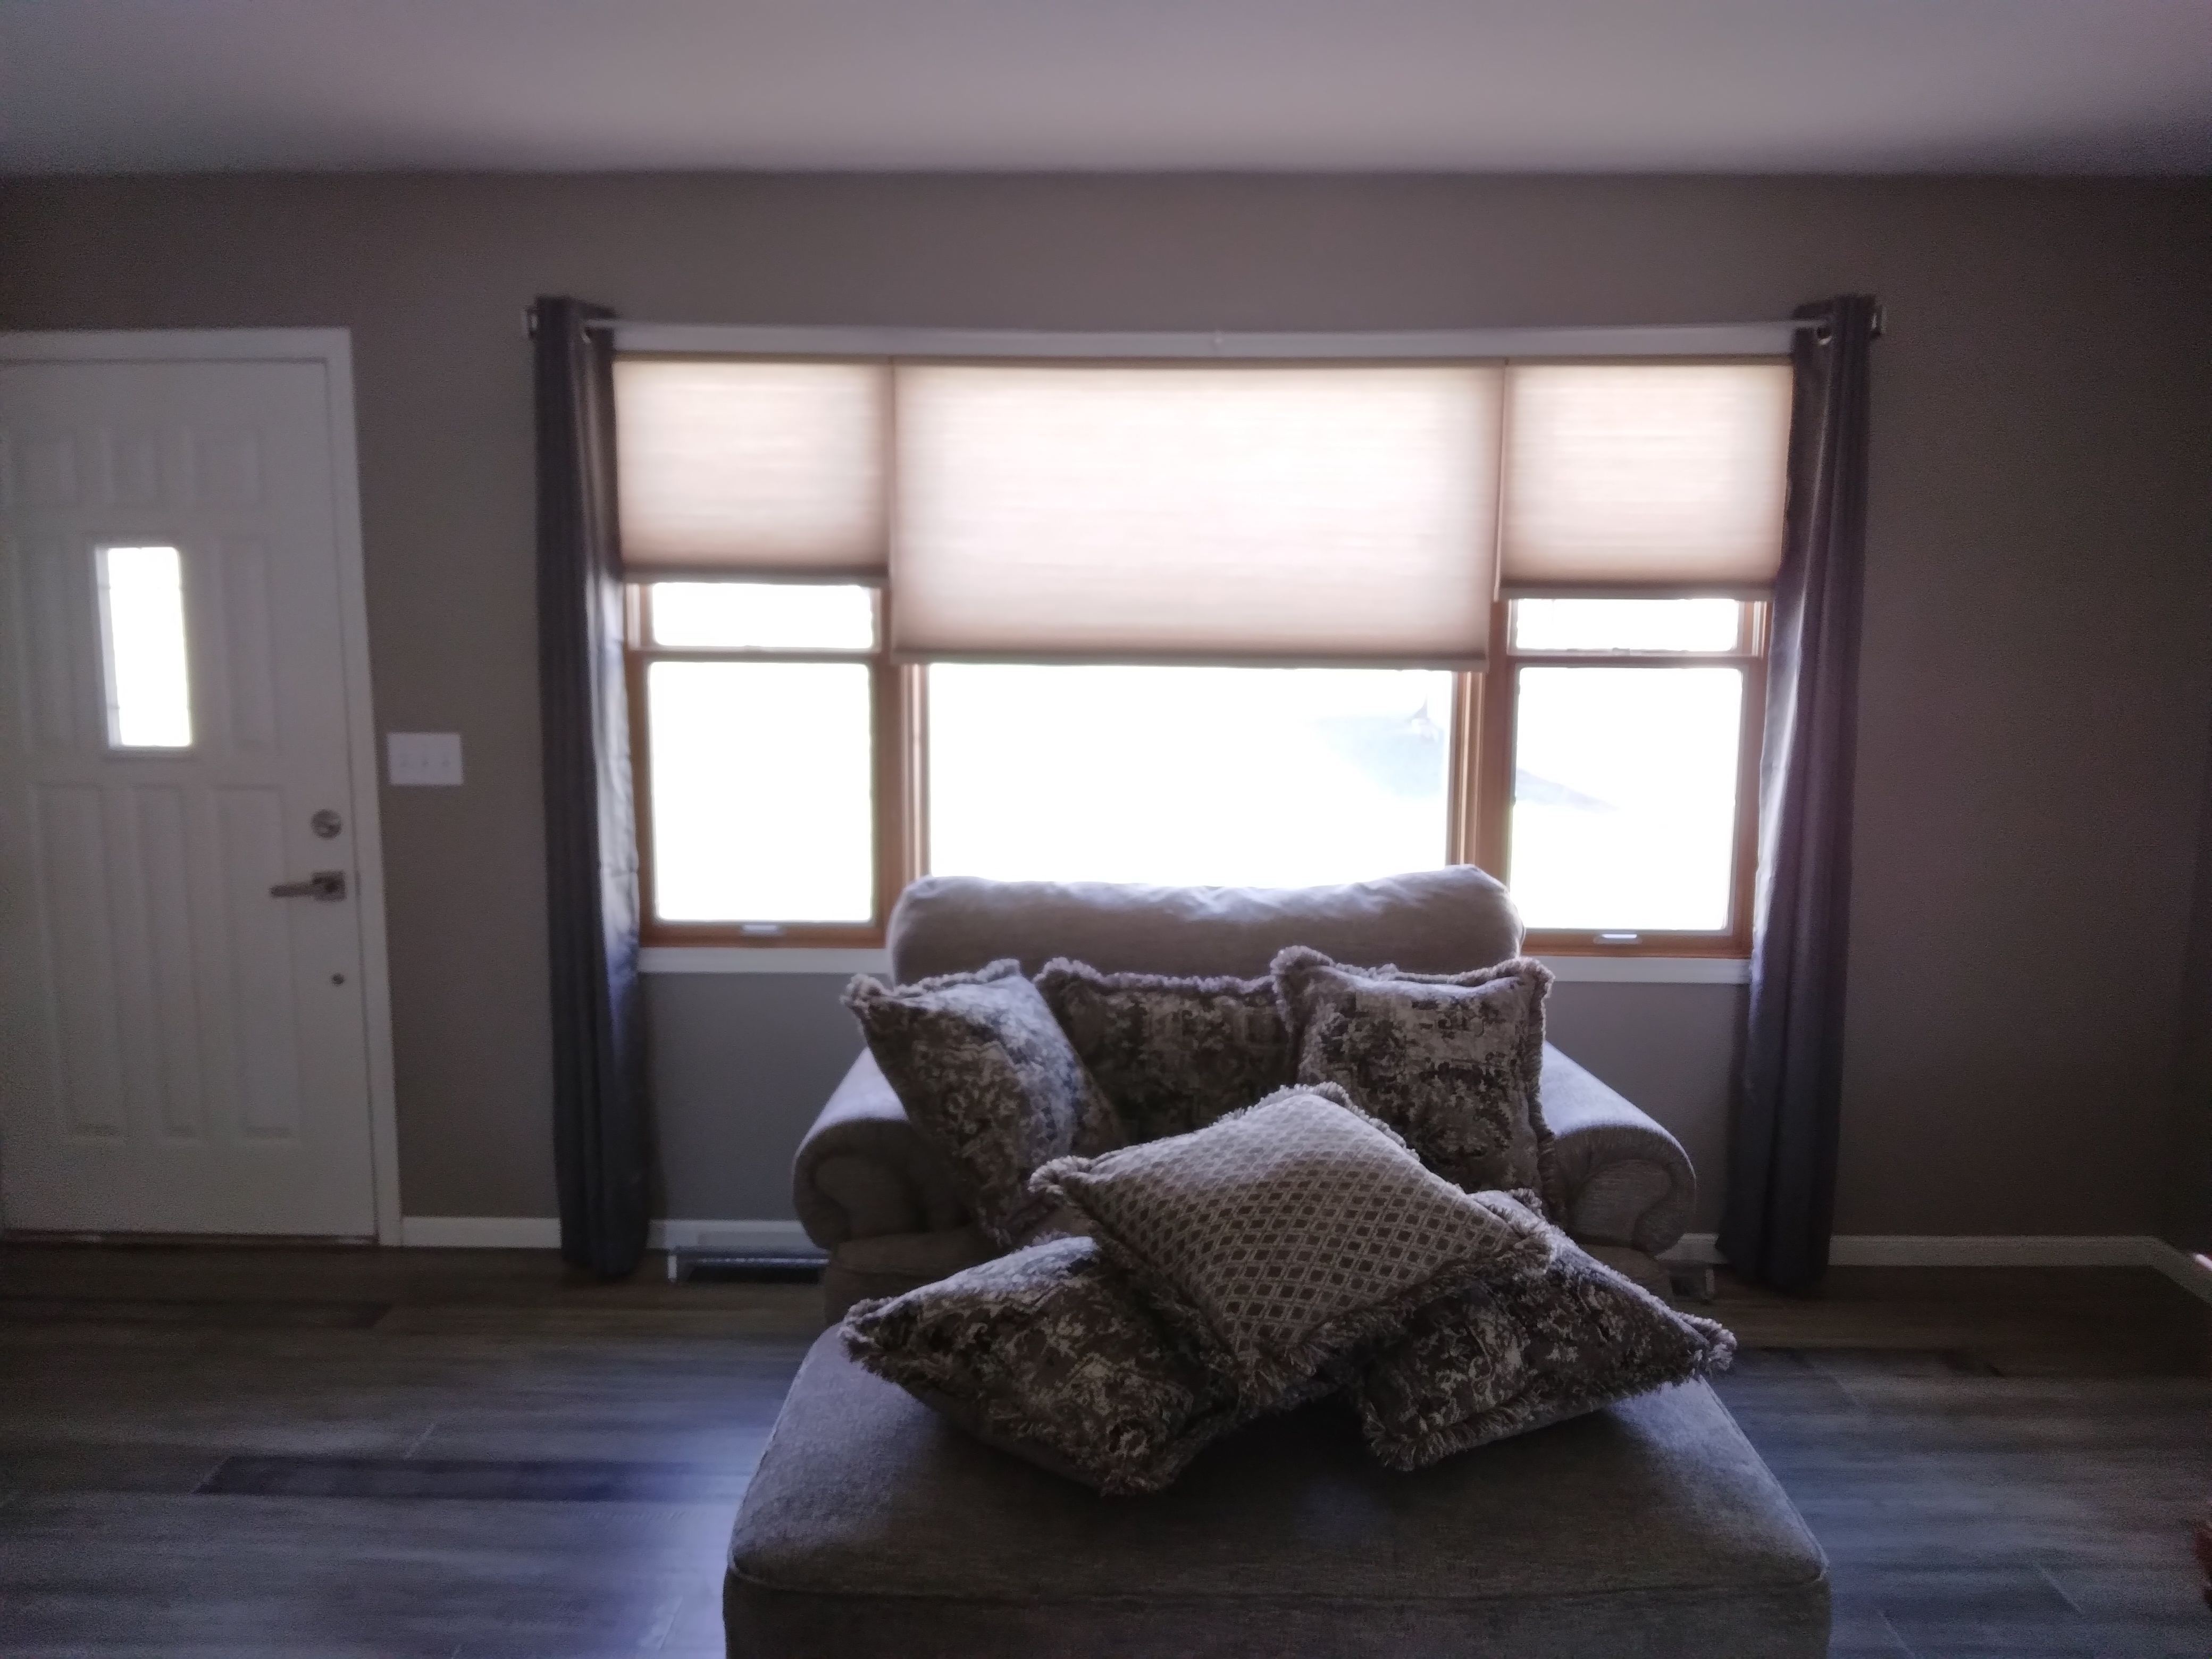 Cordless honeycomb shades are a great choice when choosing window coverings for multiple windows next to each other.  BudgetBlinds  WindowCoverings  Shades  HoneycombShades  CellularShades  SpringfieldIllinois